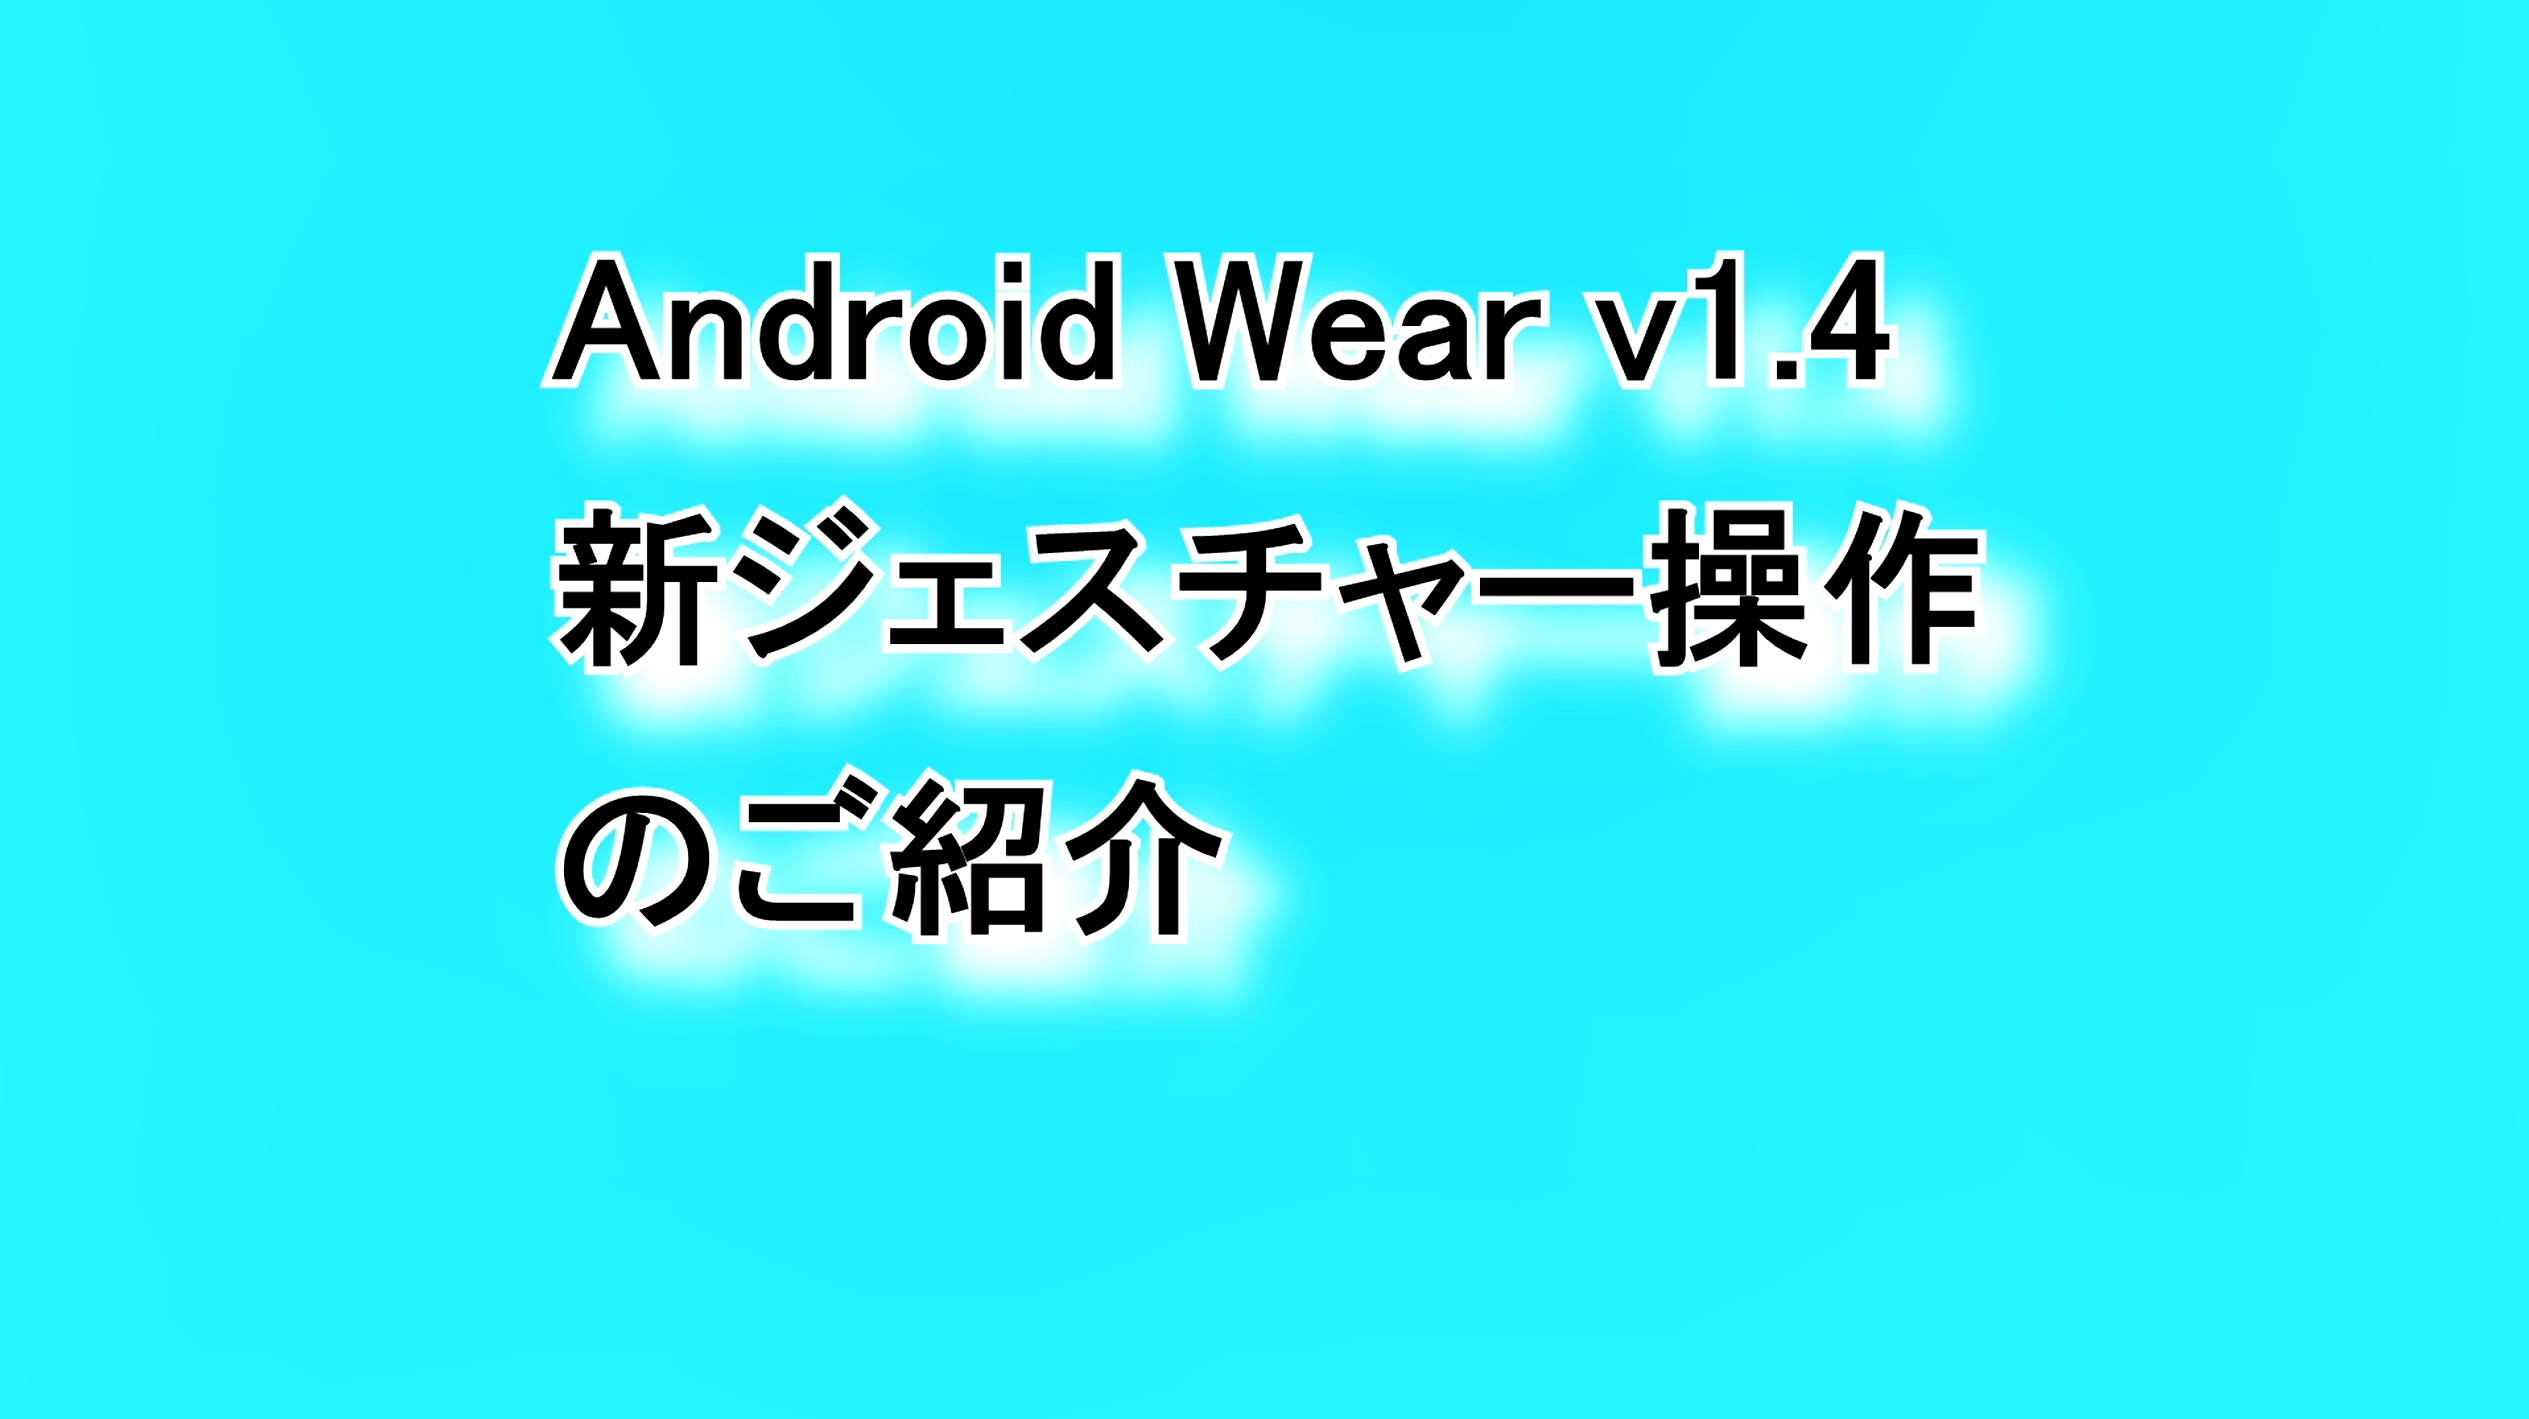 Android Wear 1.4（Android 6.0.1）追加された新しいジェスチャー操作機能